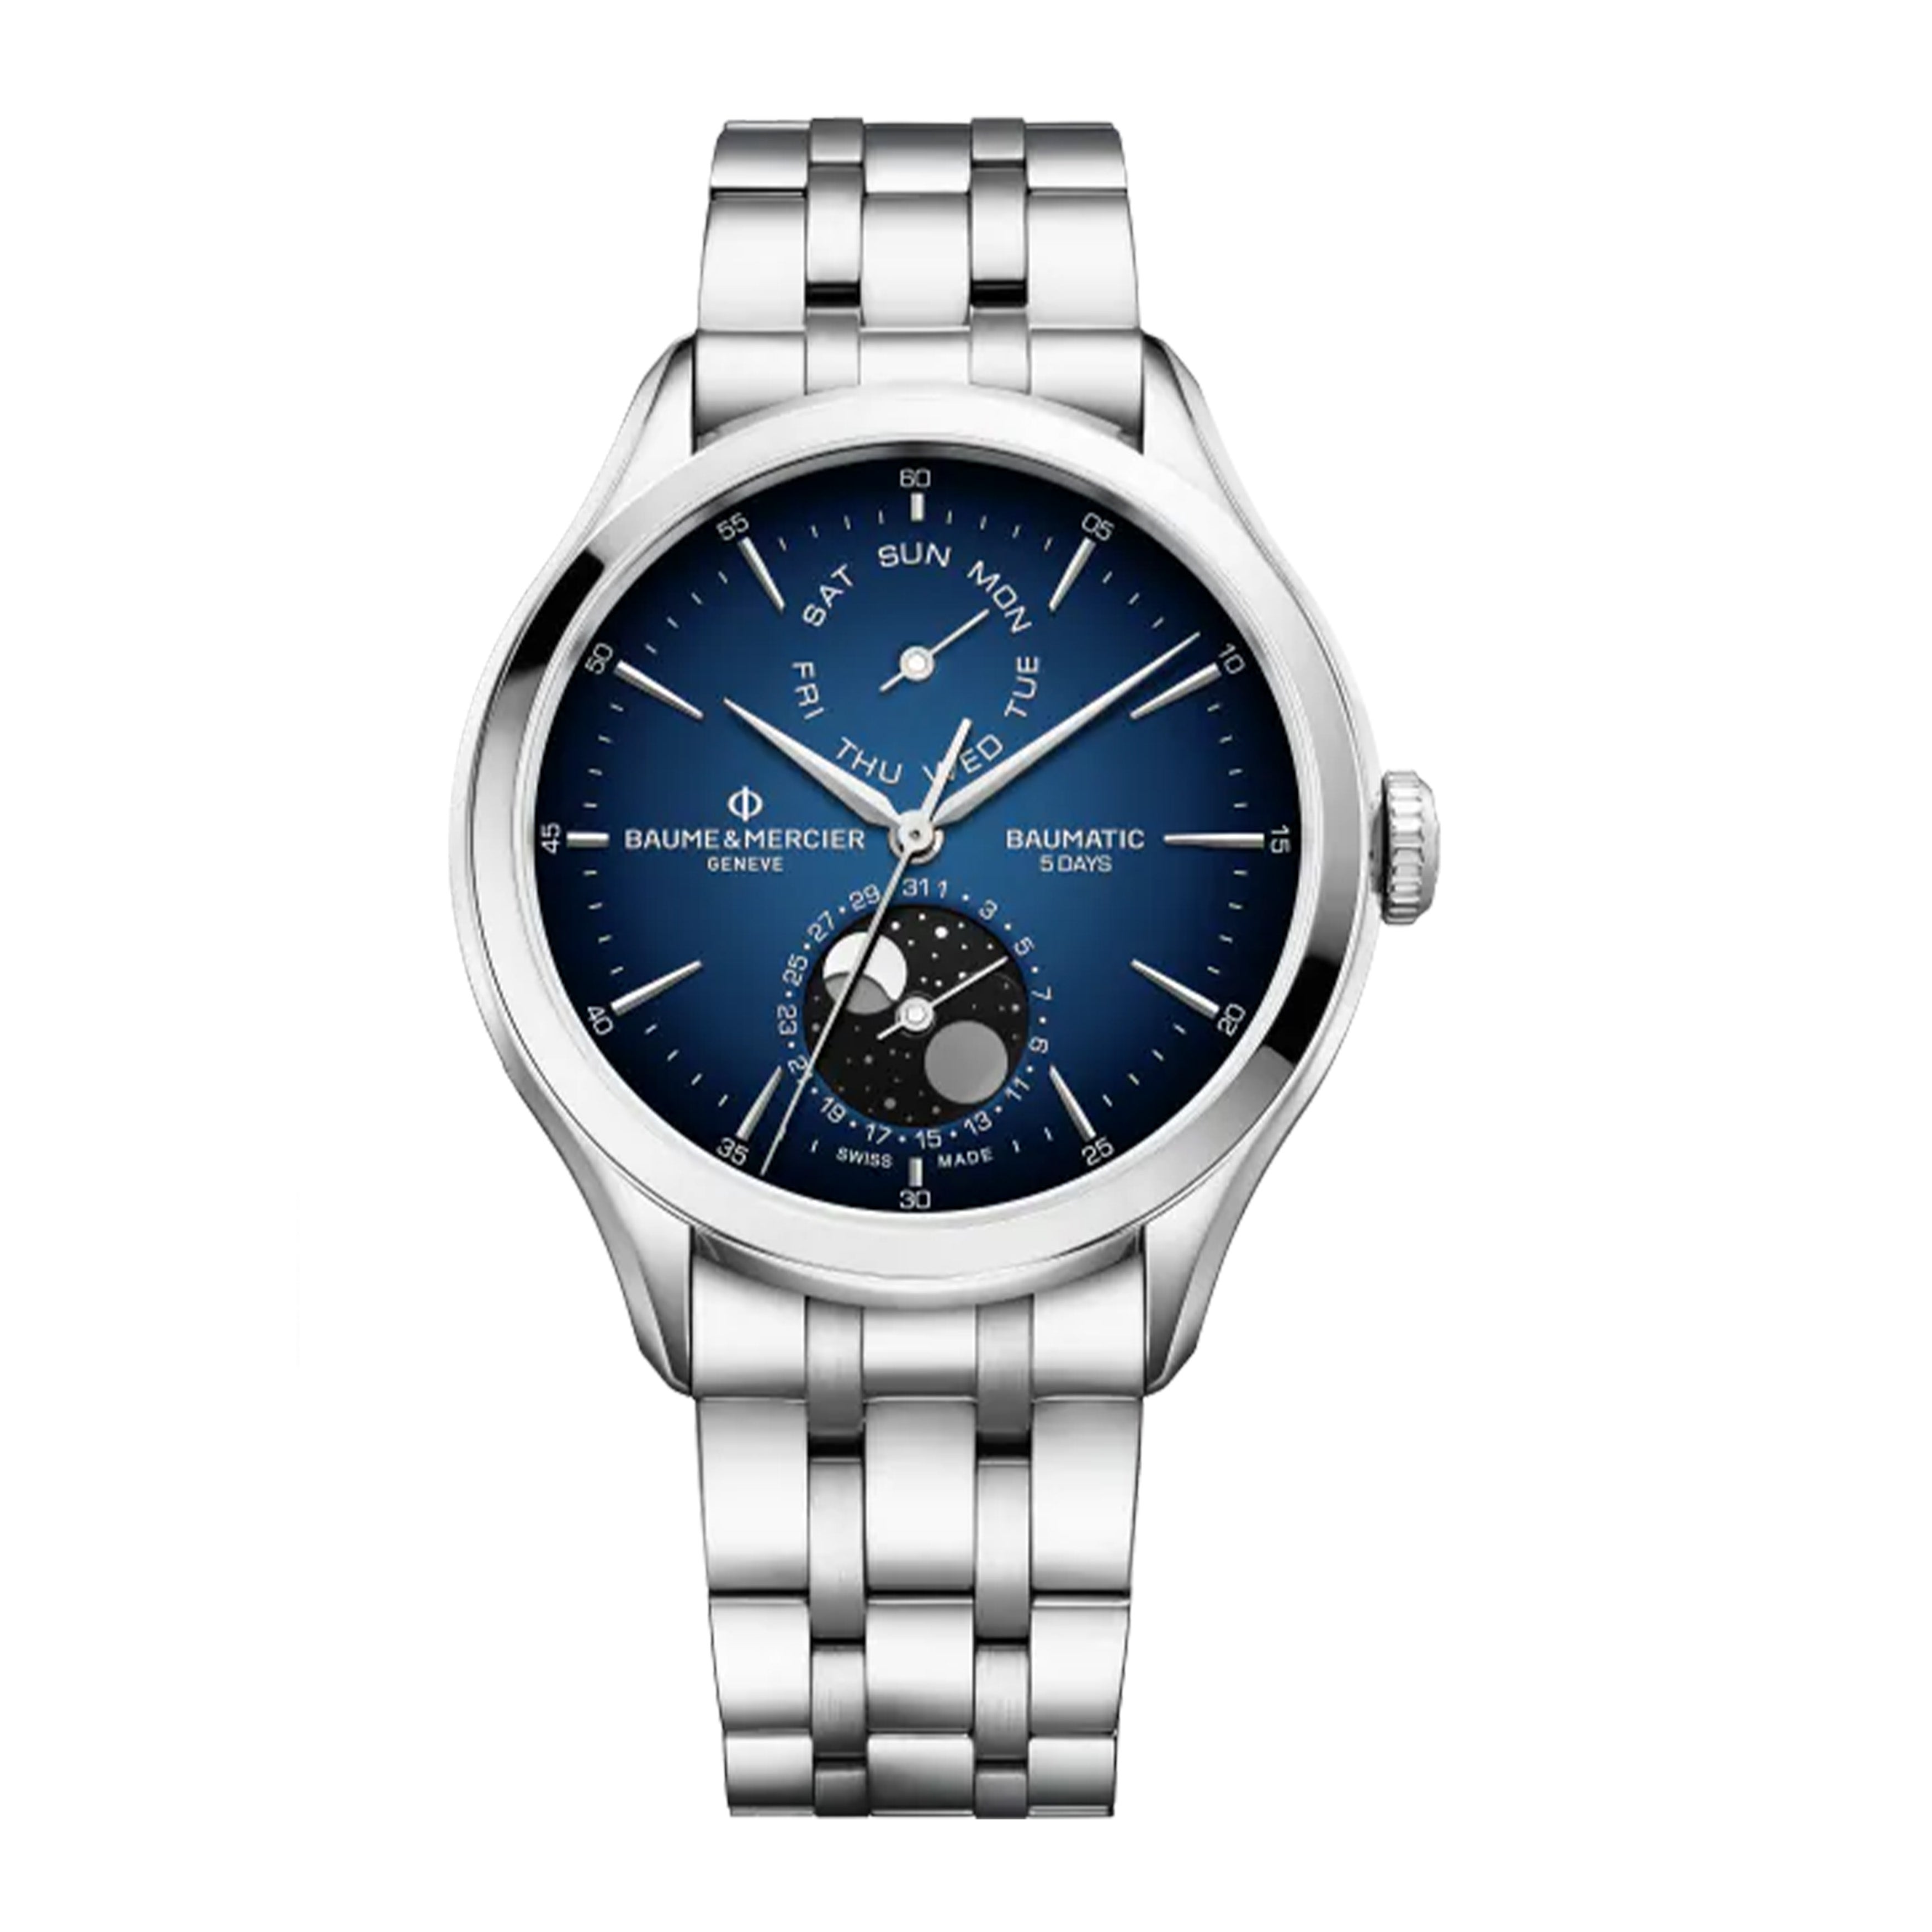 BAUME & MERCIER CLIFTON Day-Date Moon Phase Watch, 42MM BLUE DIAL, 10725